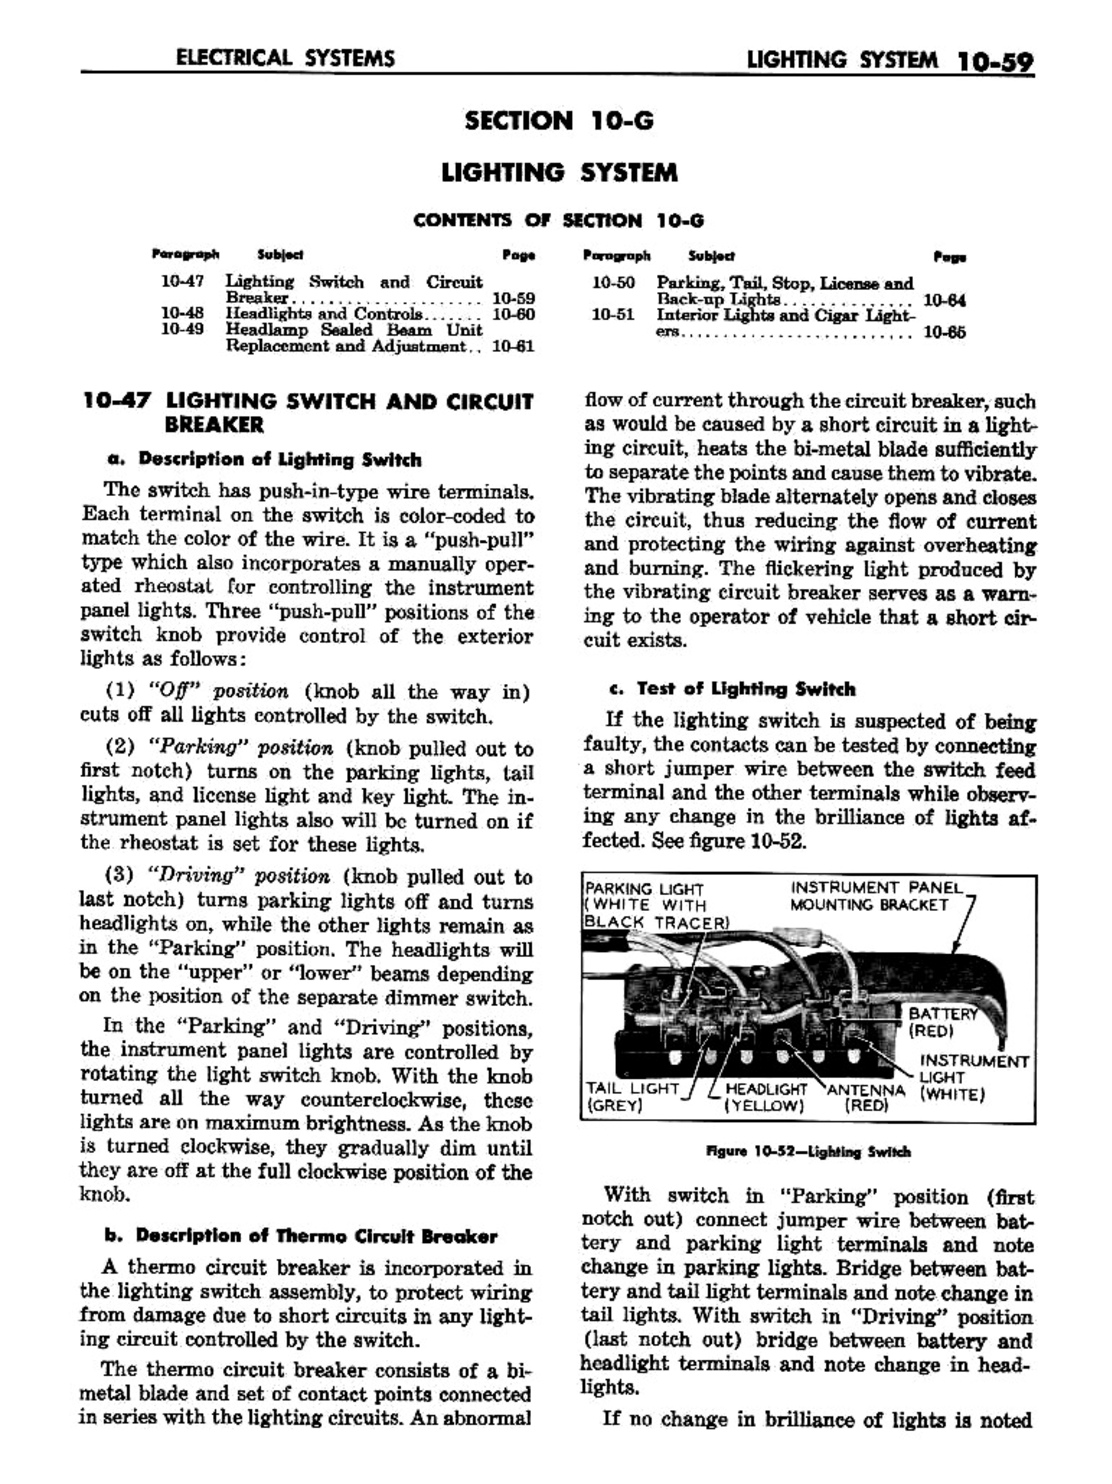 n_11 1957 Buick Shop Manual - Electrical Systems-059-059.jpg